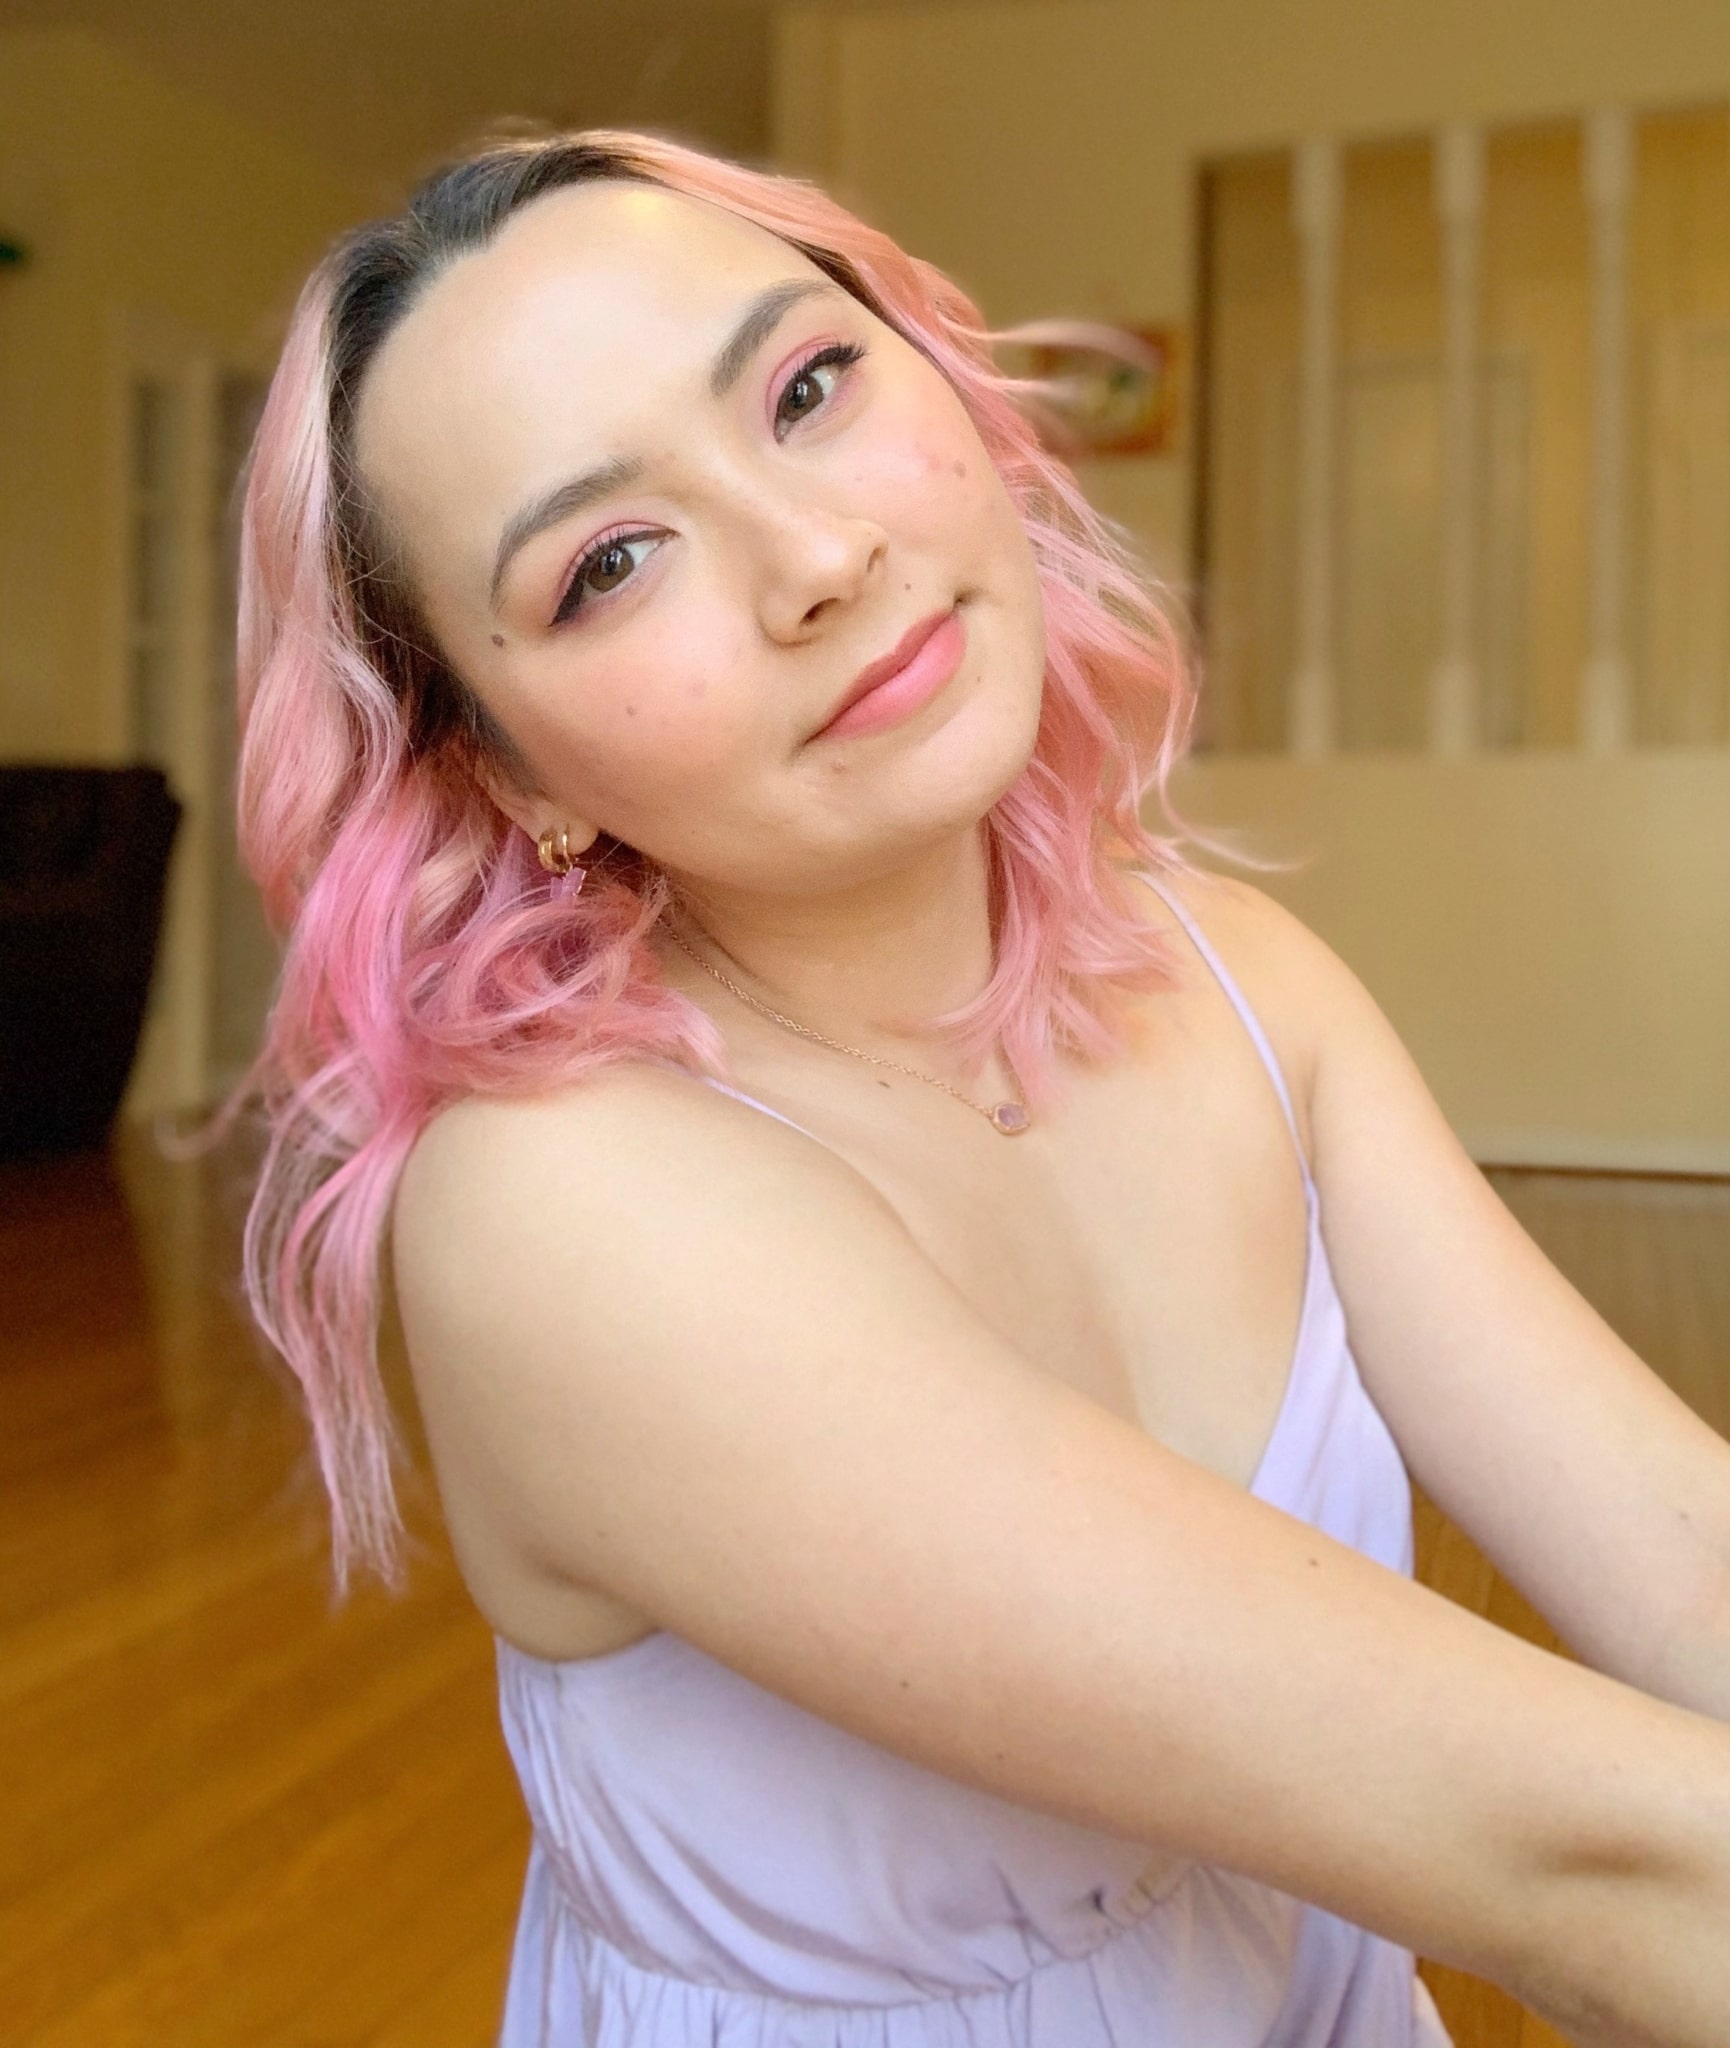 Jacqueline Le smiling slightly at the camera with pastel pink hair